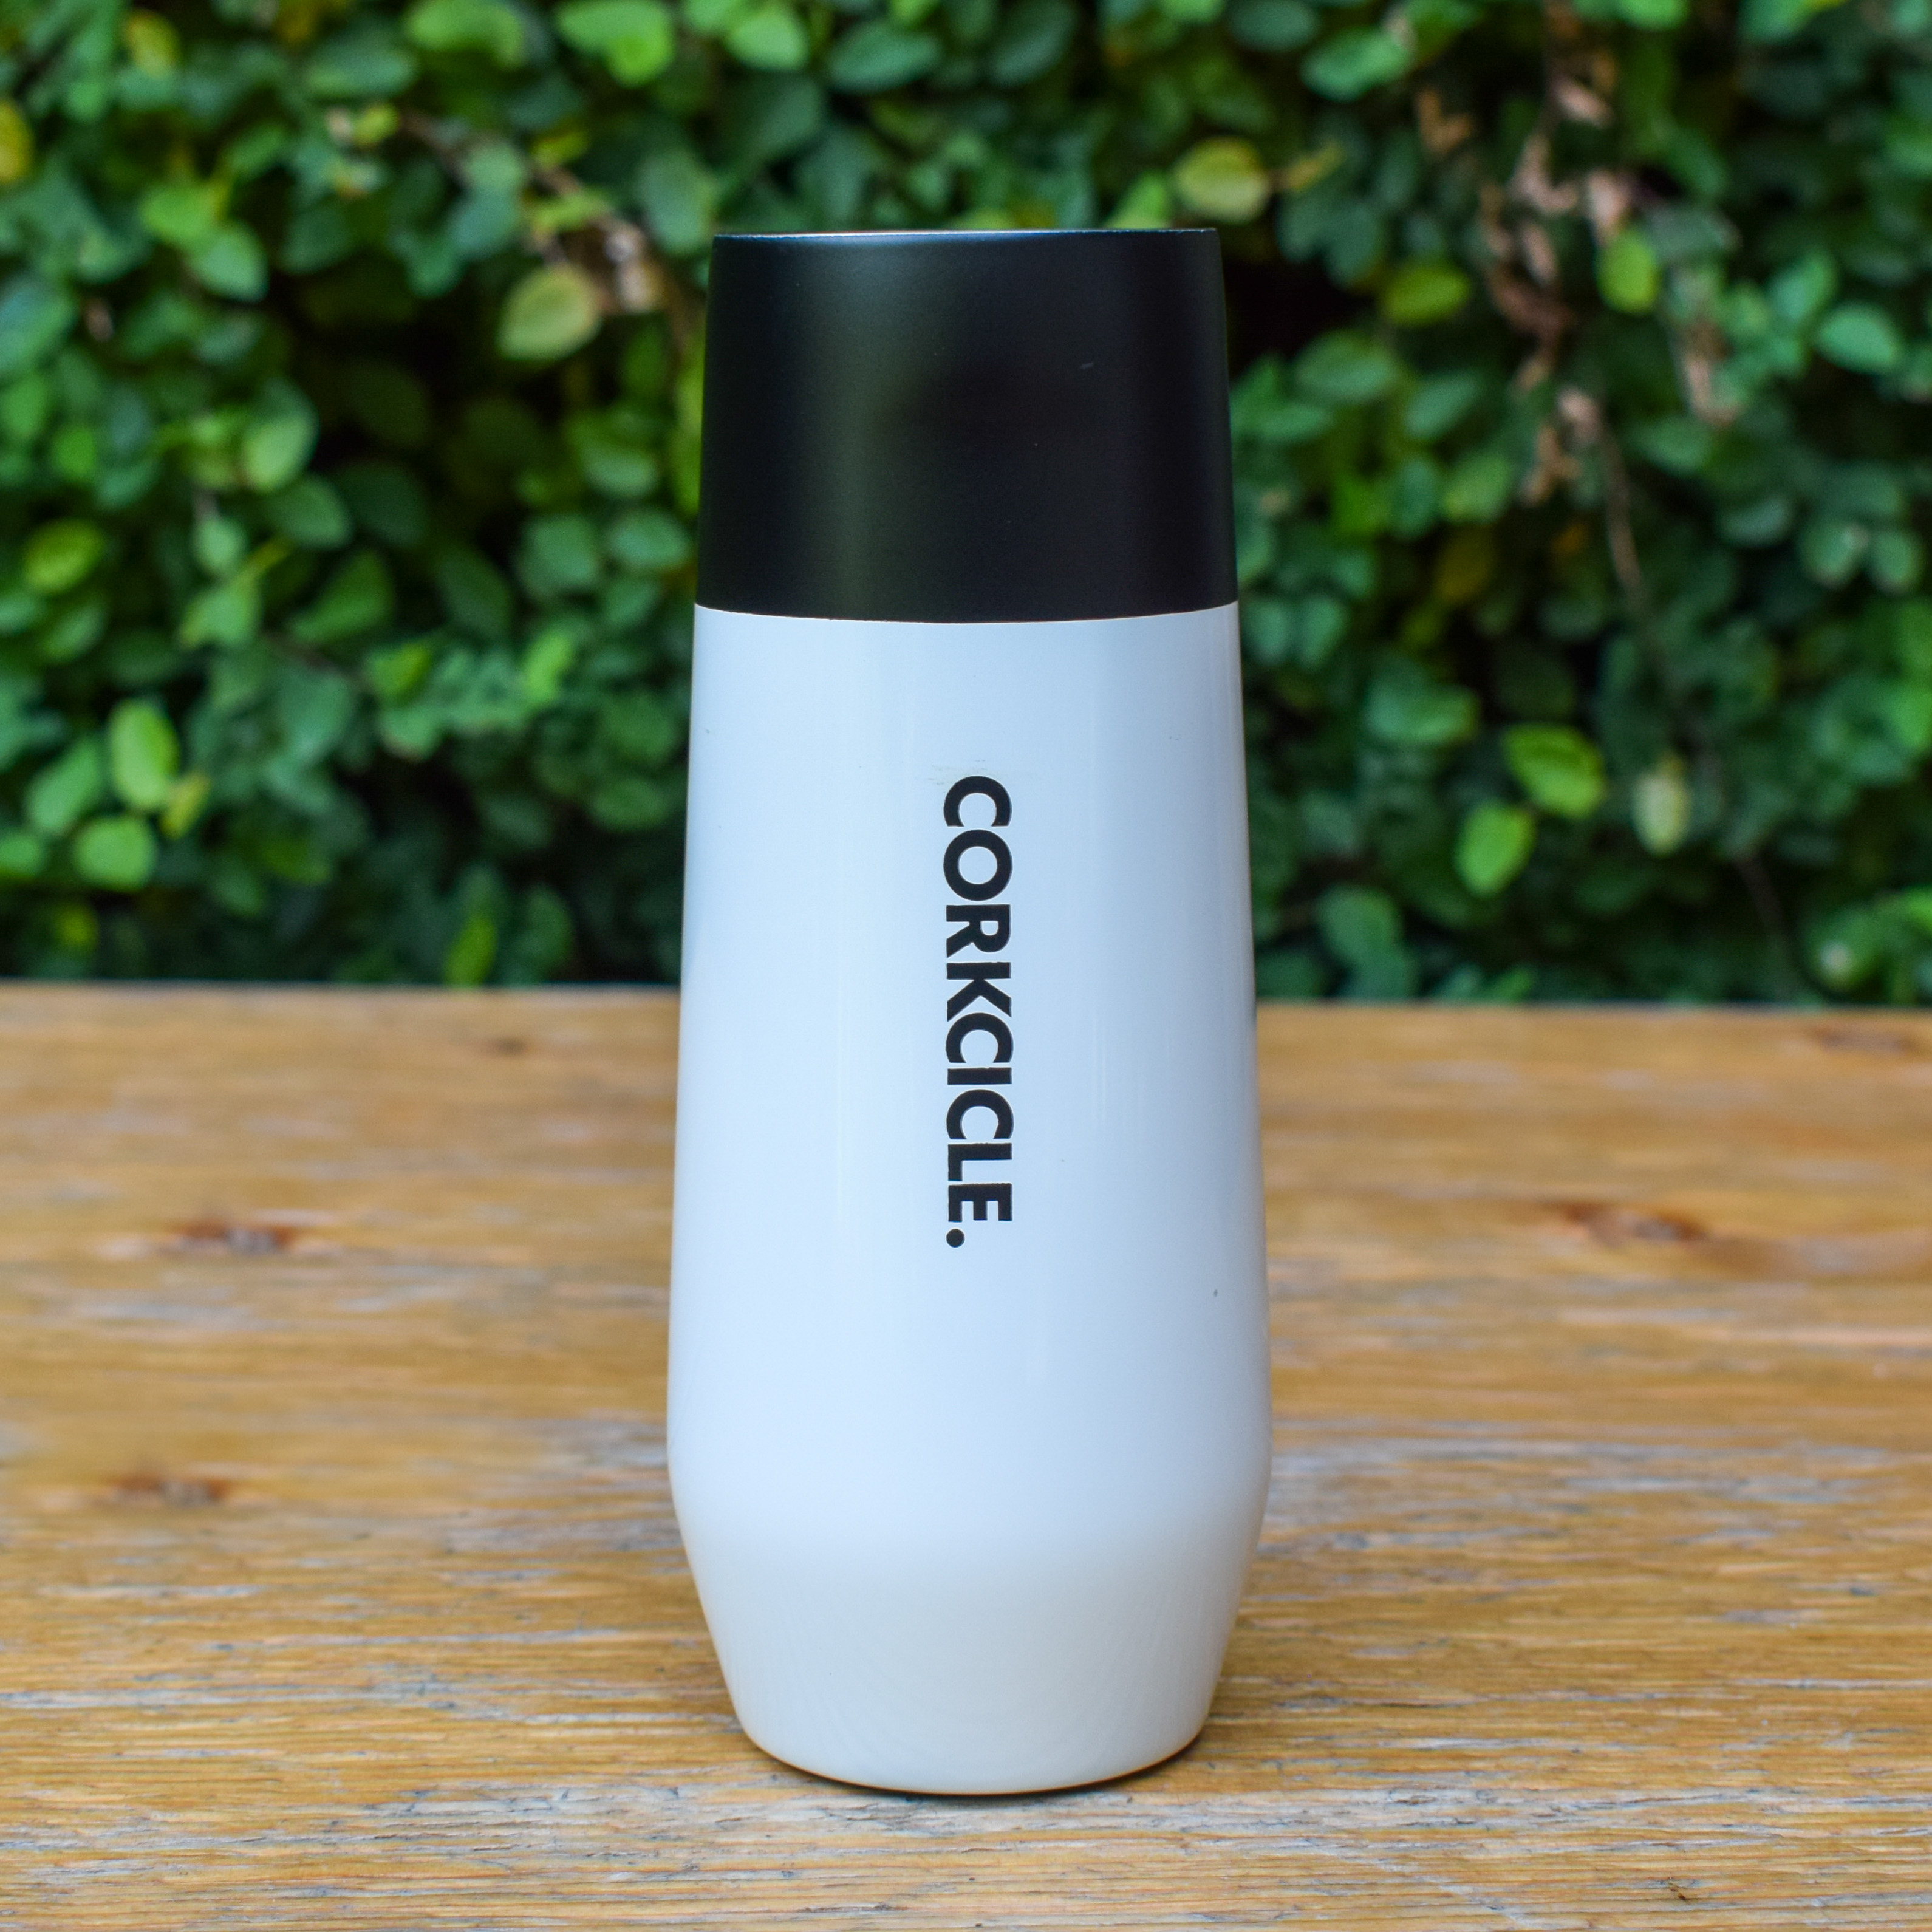 Corkcicle 7 oz Stemless Flute Tumbler, Stainless Steel, Triple Insulated,  Champagne Flute, Dragonfly